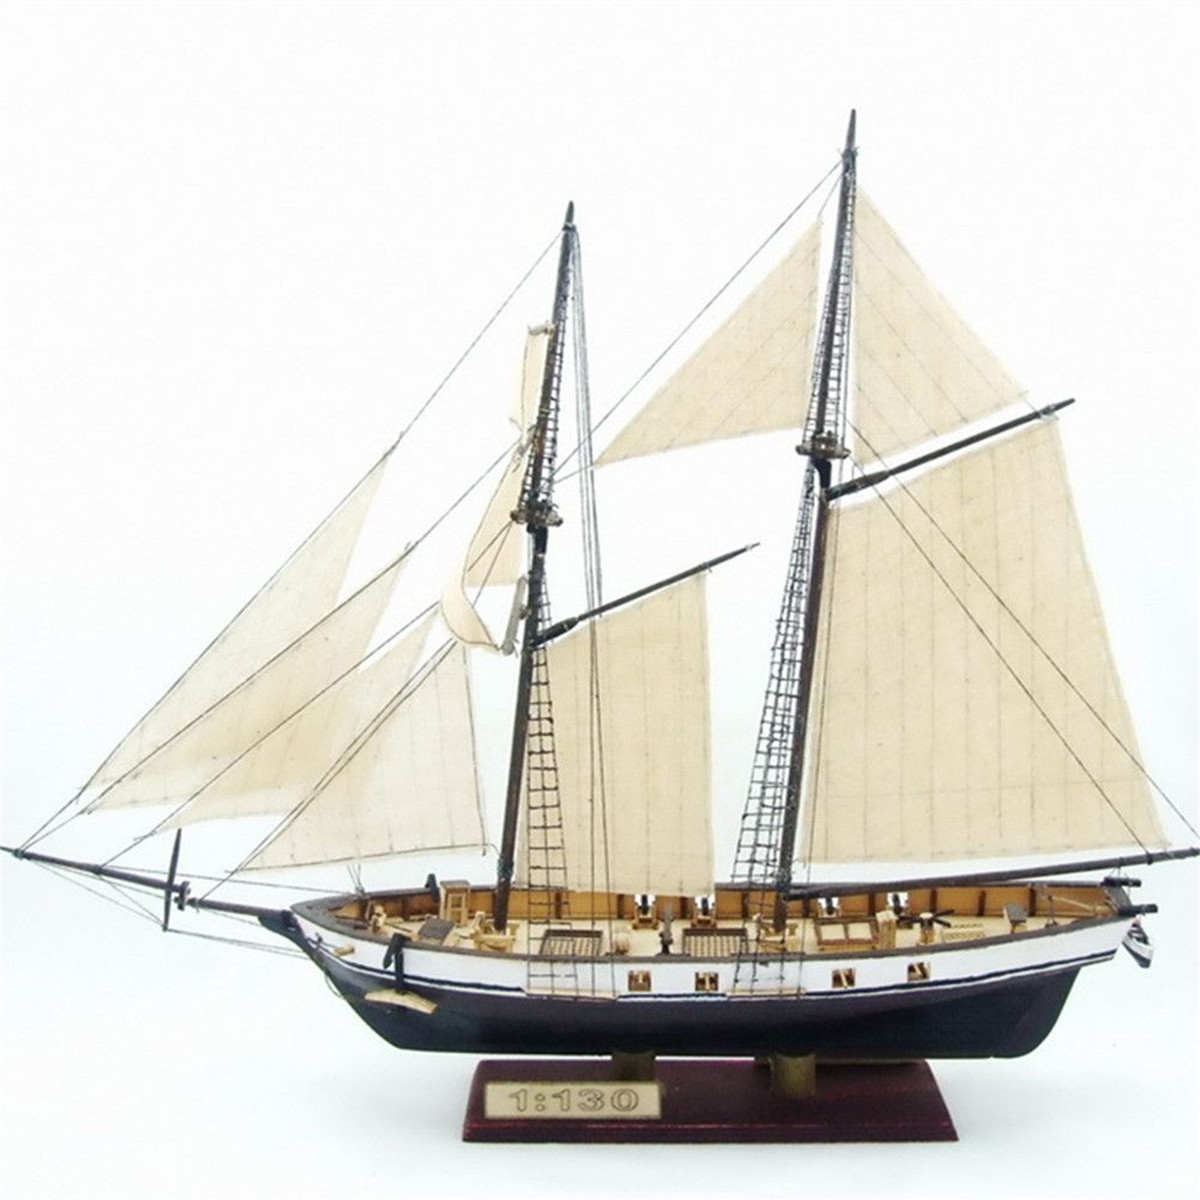 380x130x270mm-DIY-Ship-Assembly-Model-Kits-Classical-Wooden-Sailing-Boats-Scale-Model-Decoration-1326597-1